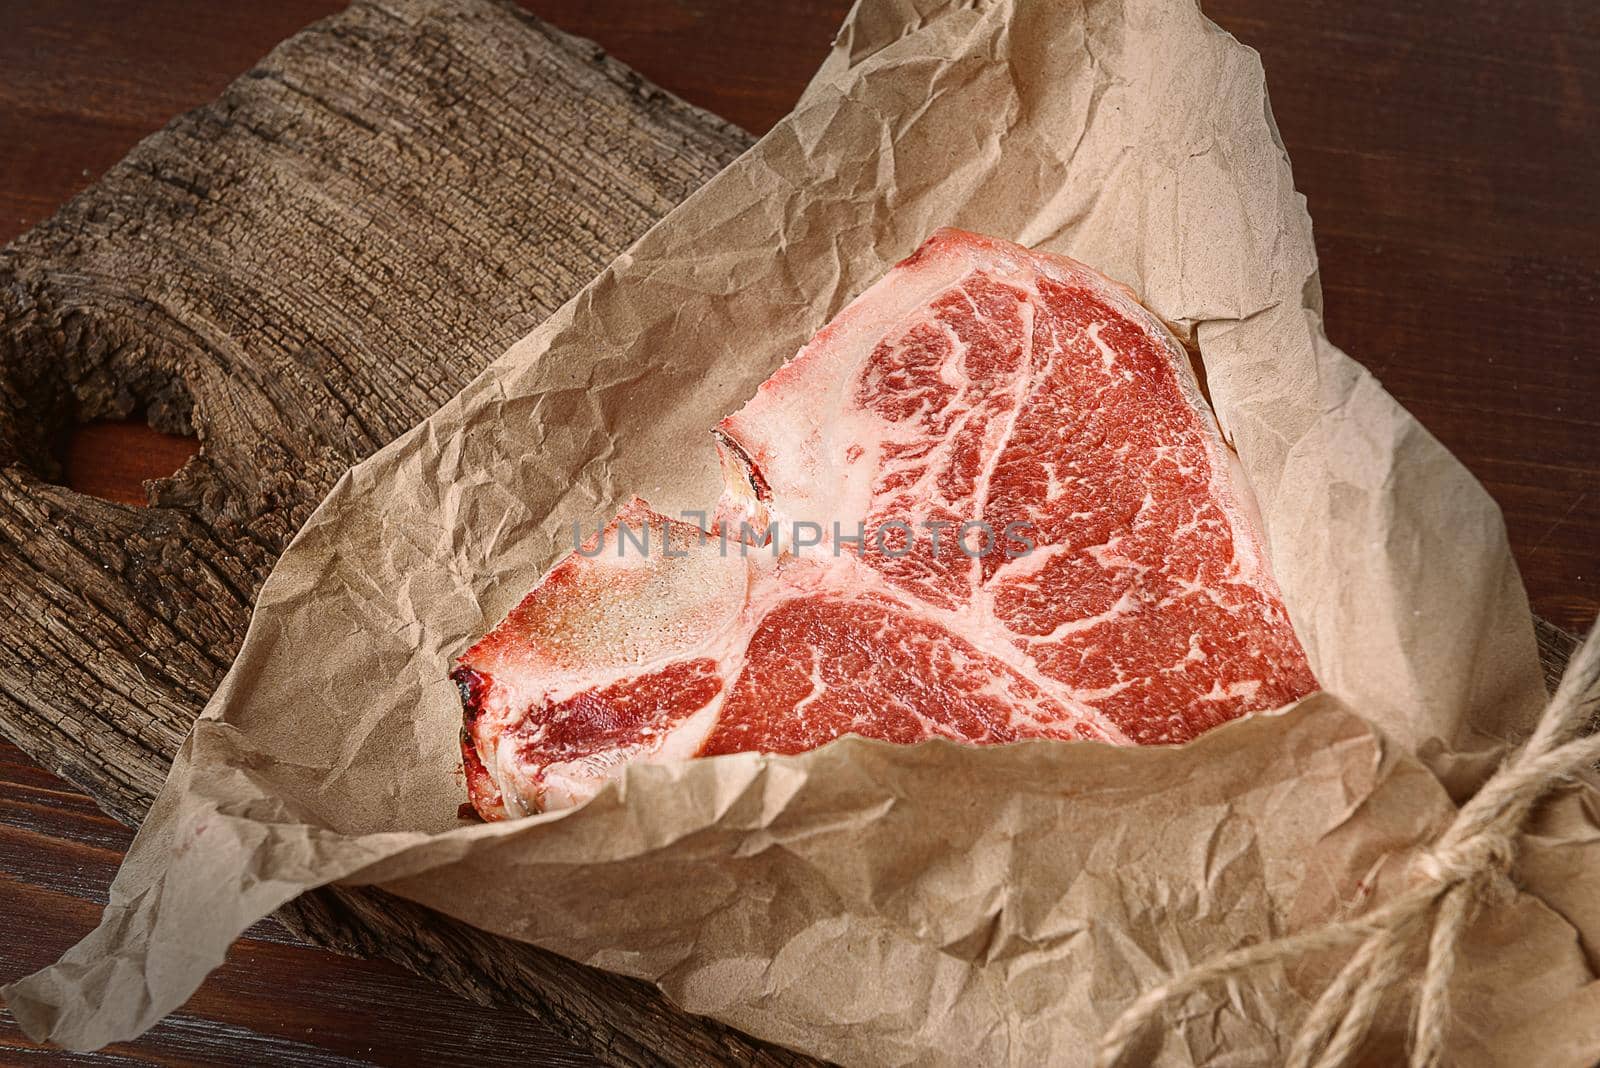 a piece of fresh farm meat t-bon non-GMO wrapped in eco-friendly wrapping paper by vvmich